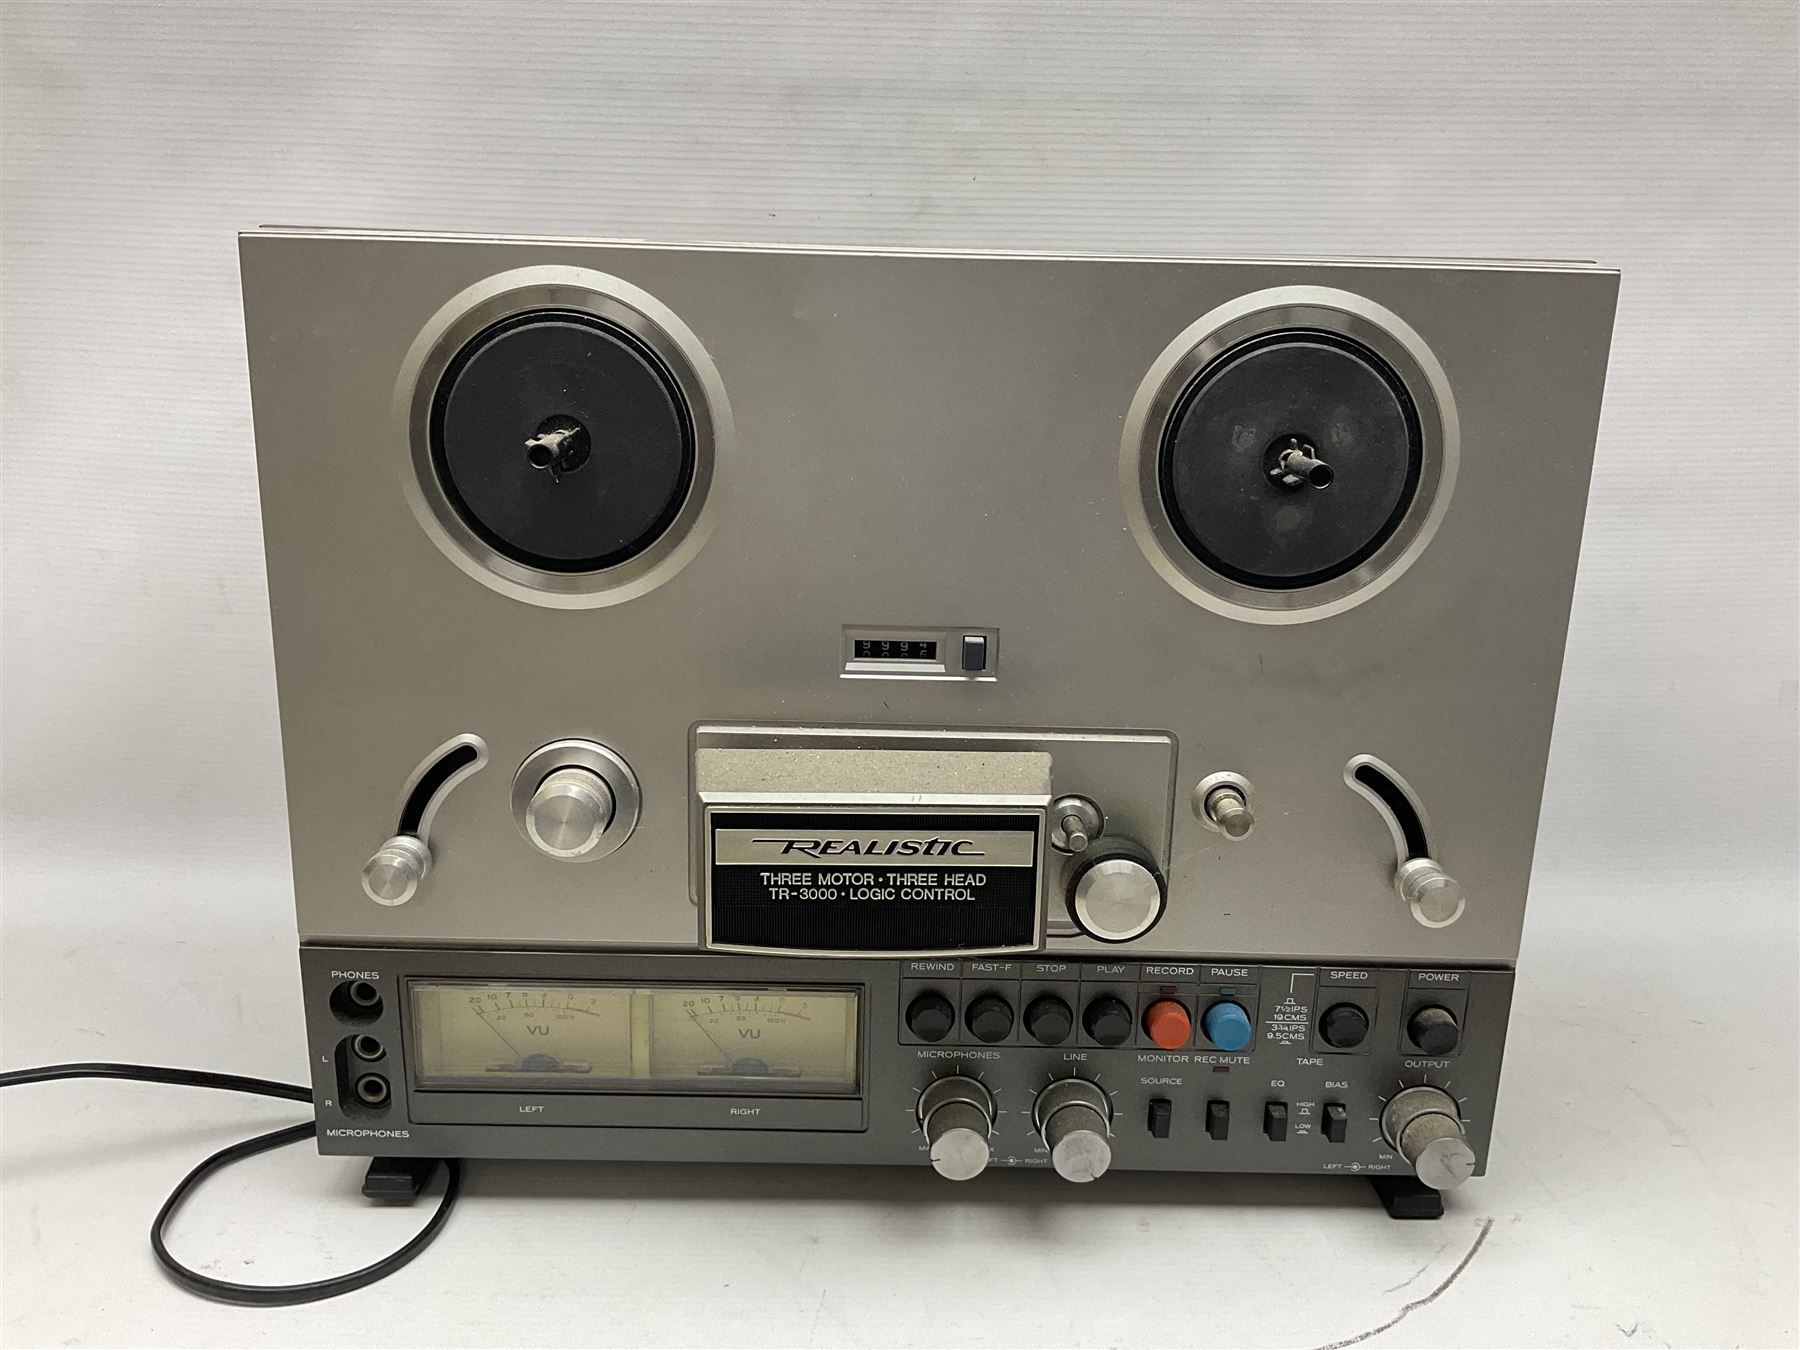 Realistic TR-3000 Logic Control stereo tape deck reel to reel HiFi - Image 10 of 17